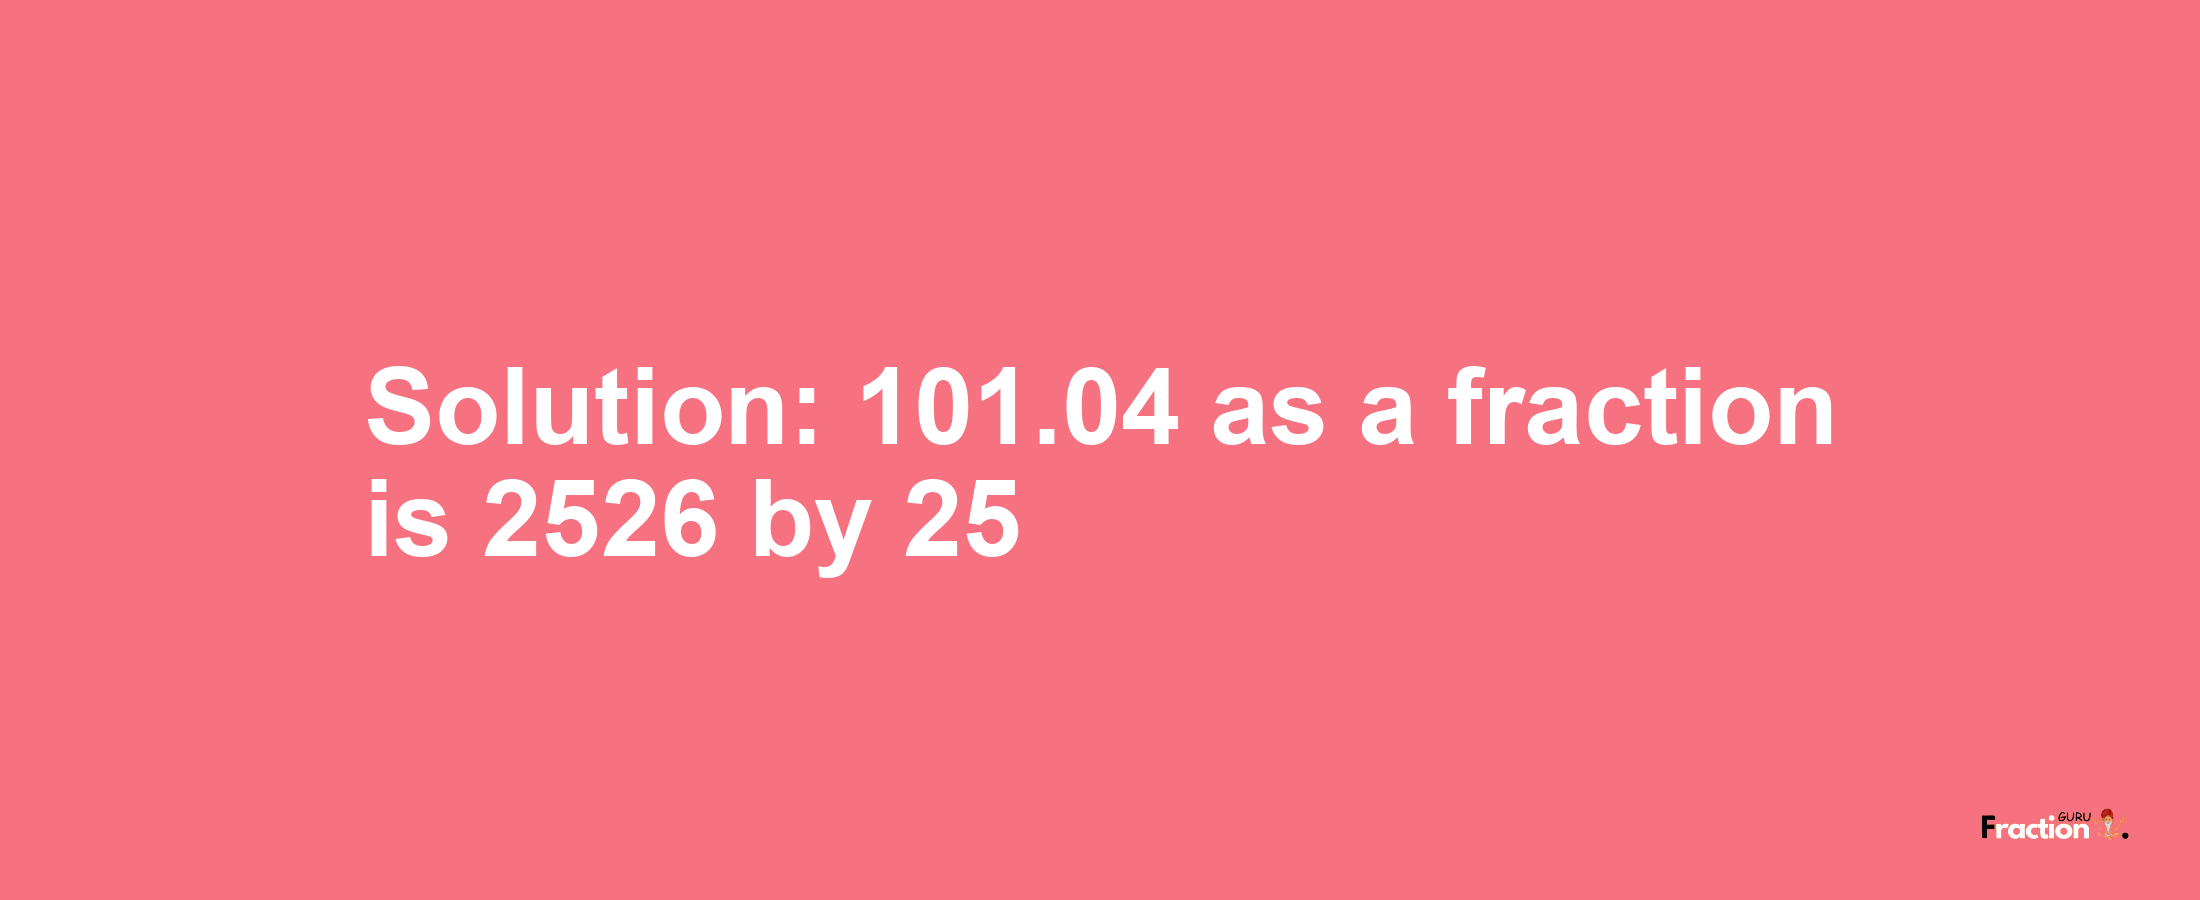 Solution:101.04 as a fraction is 2526/25